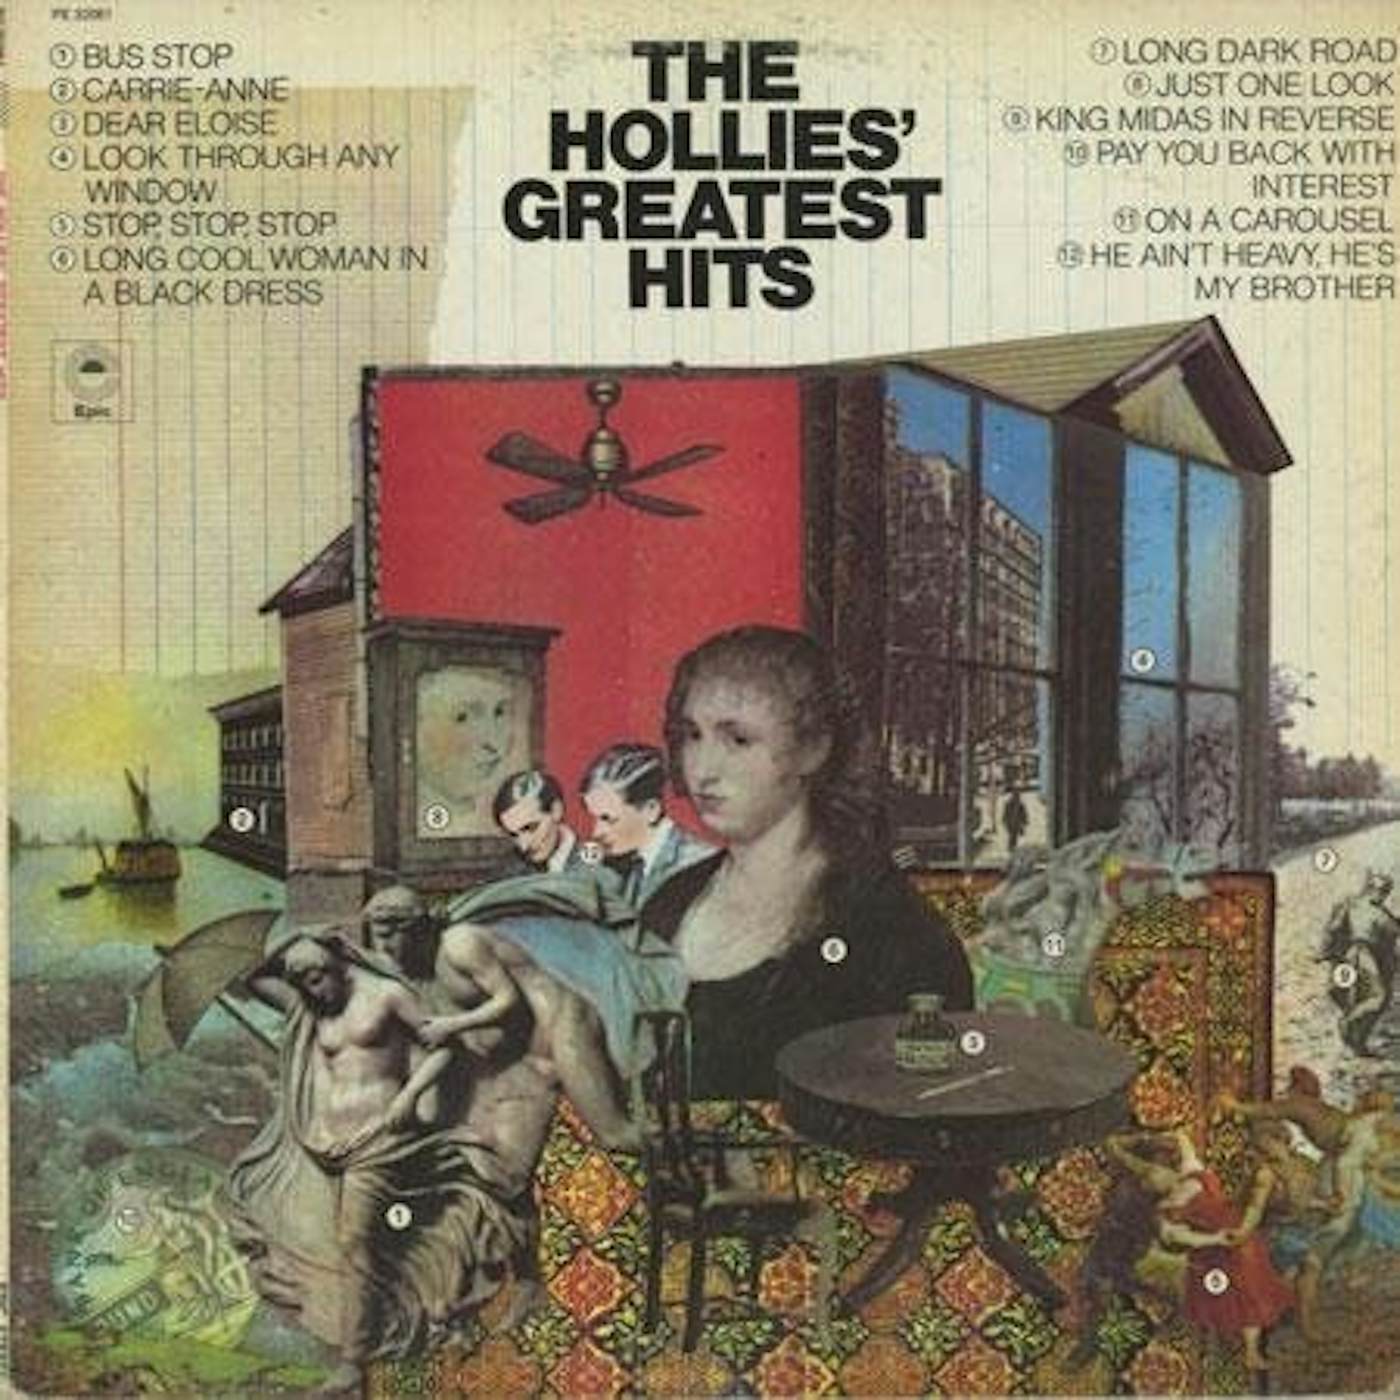 The Hollies' GREATEST HITS Vinyl Record